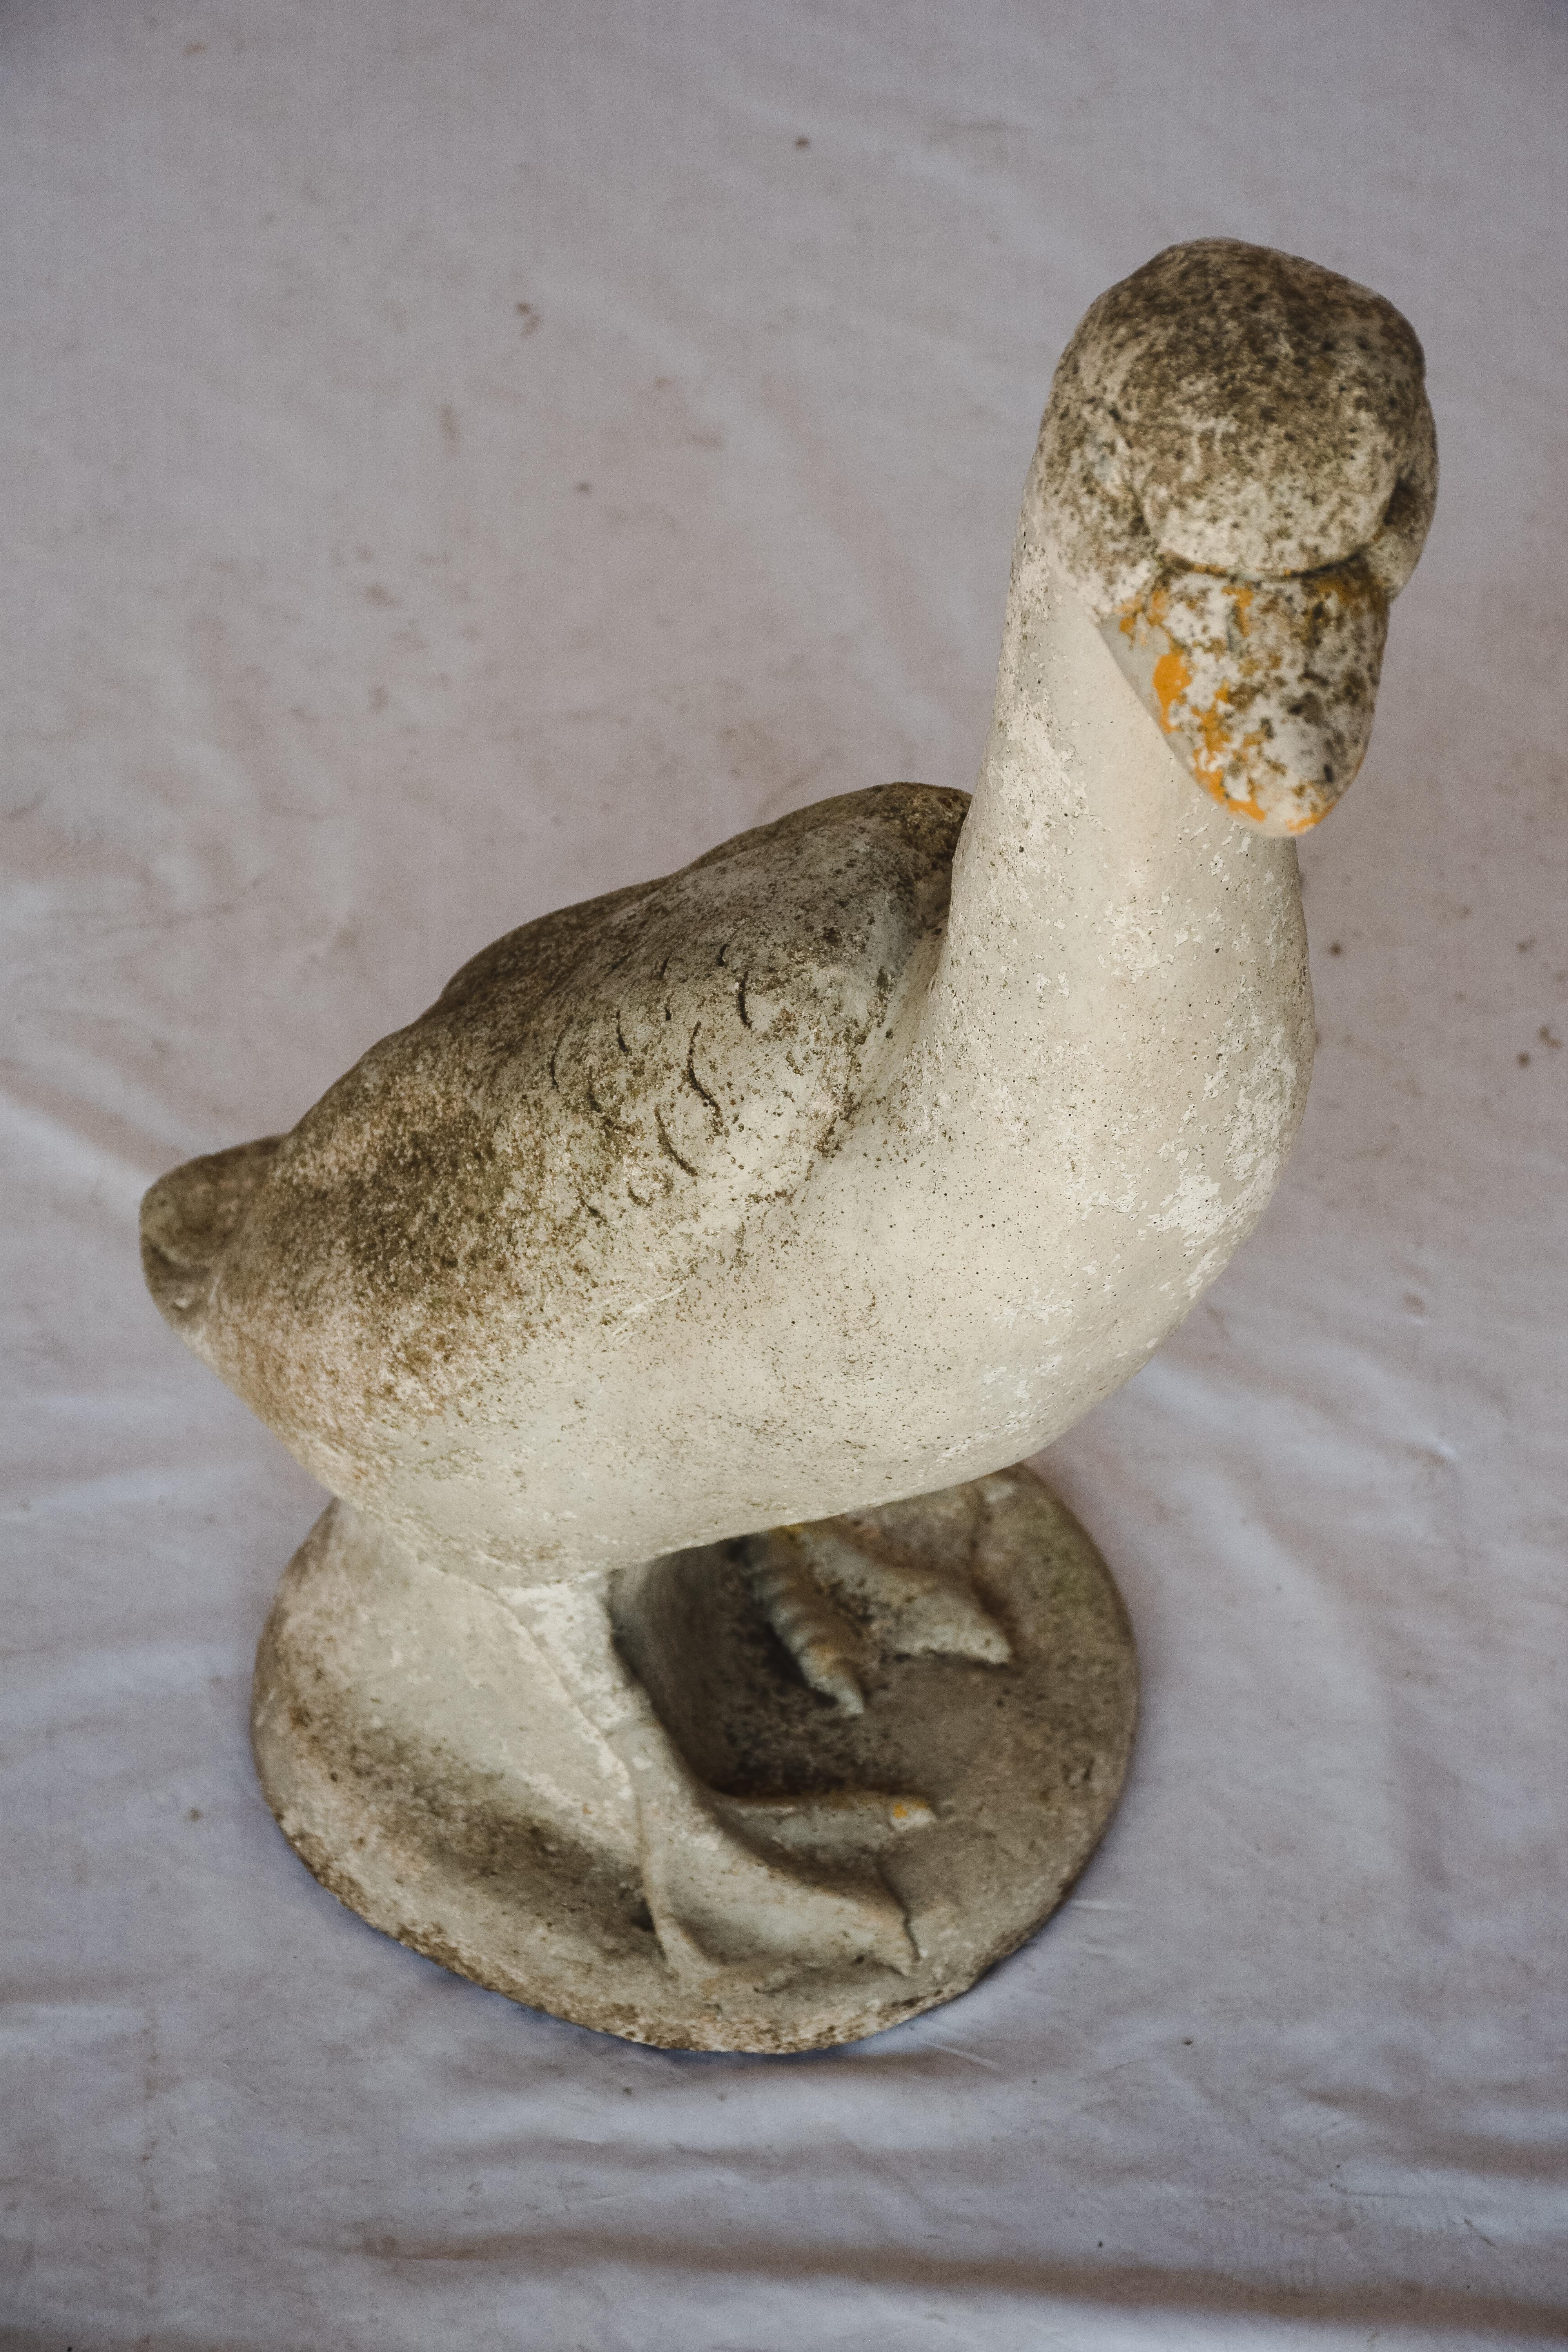 This Concrete Garden Duck would make a nice presentation placed in your garden or inside the home.